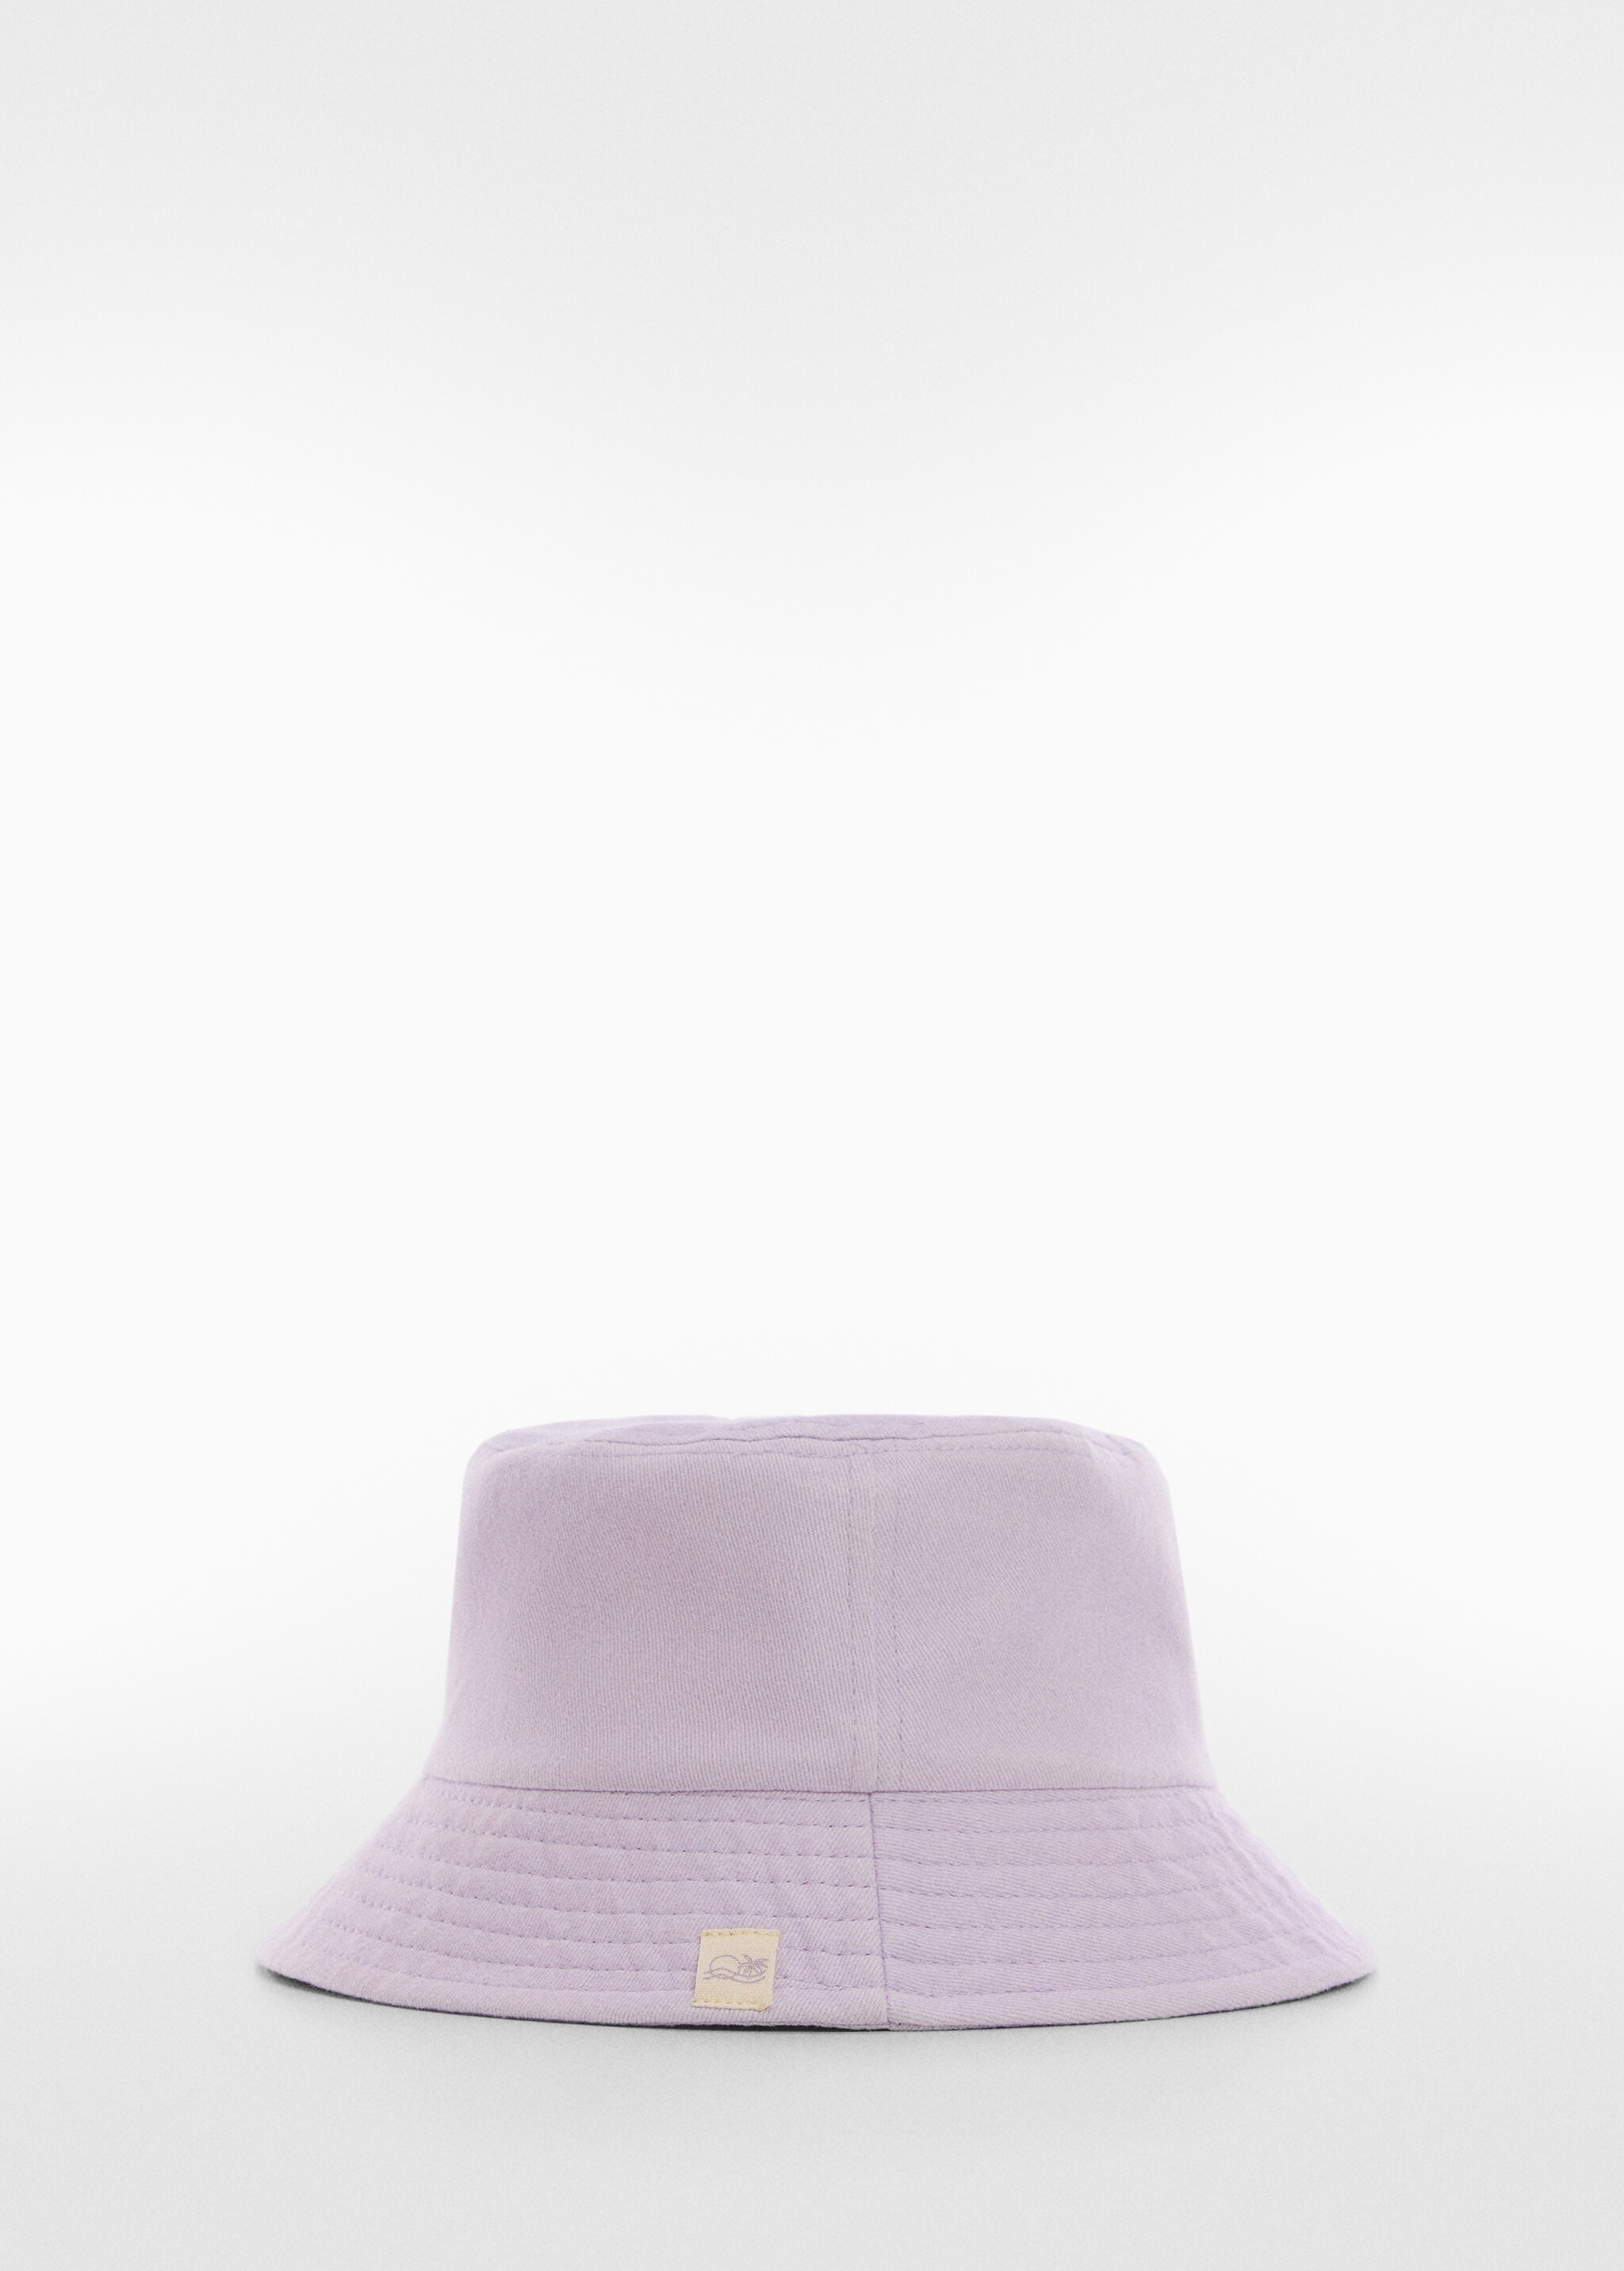 Bucket hat - Article without model